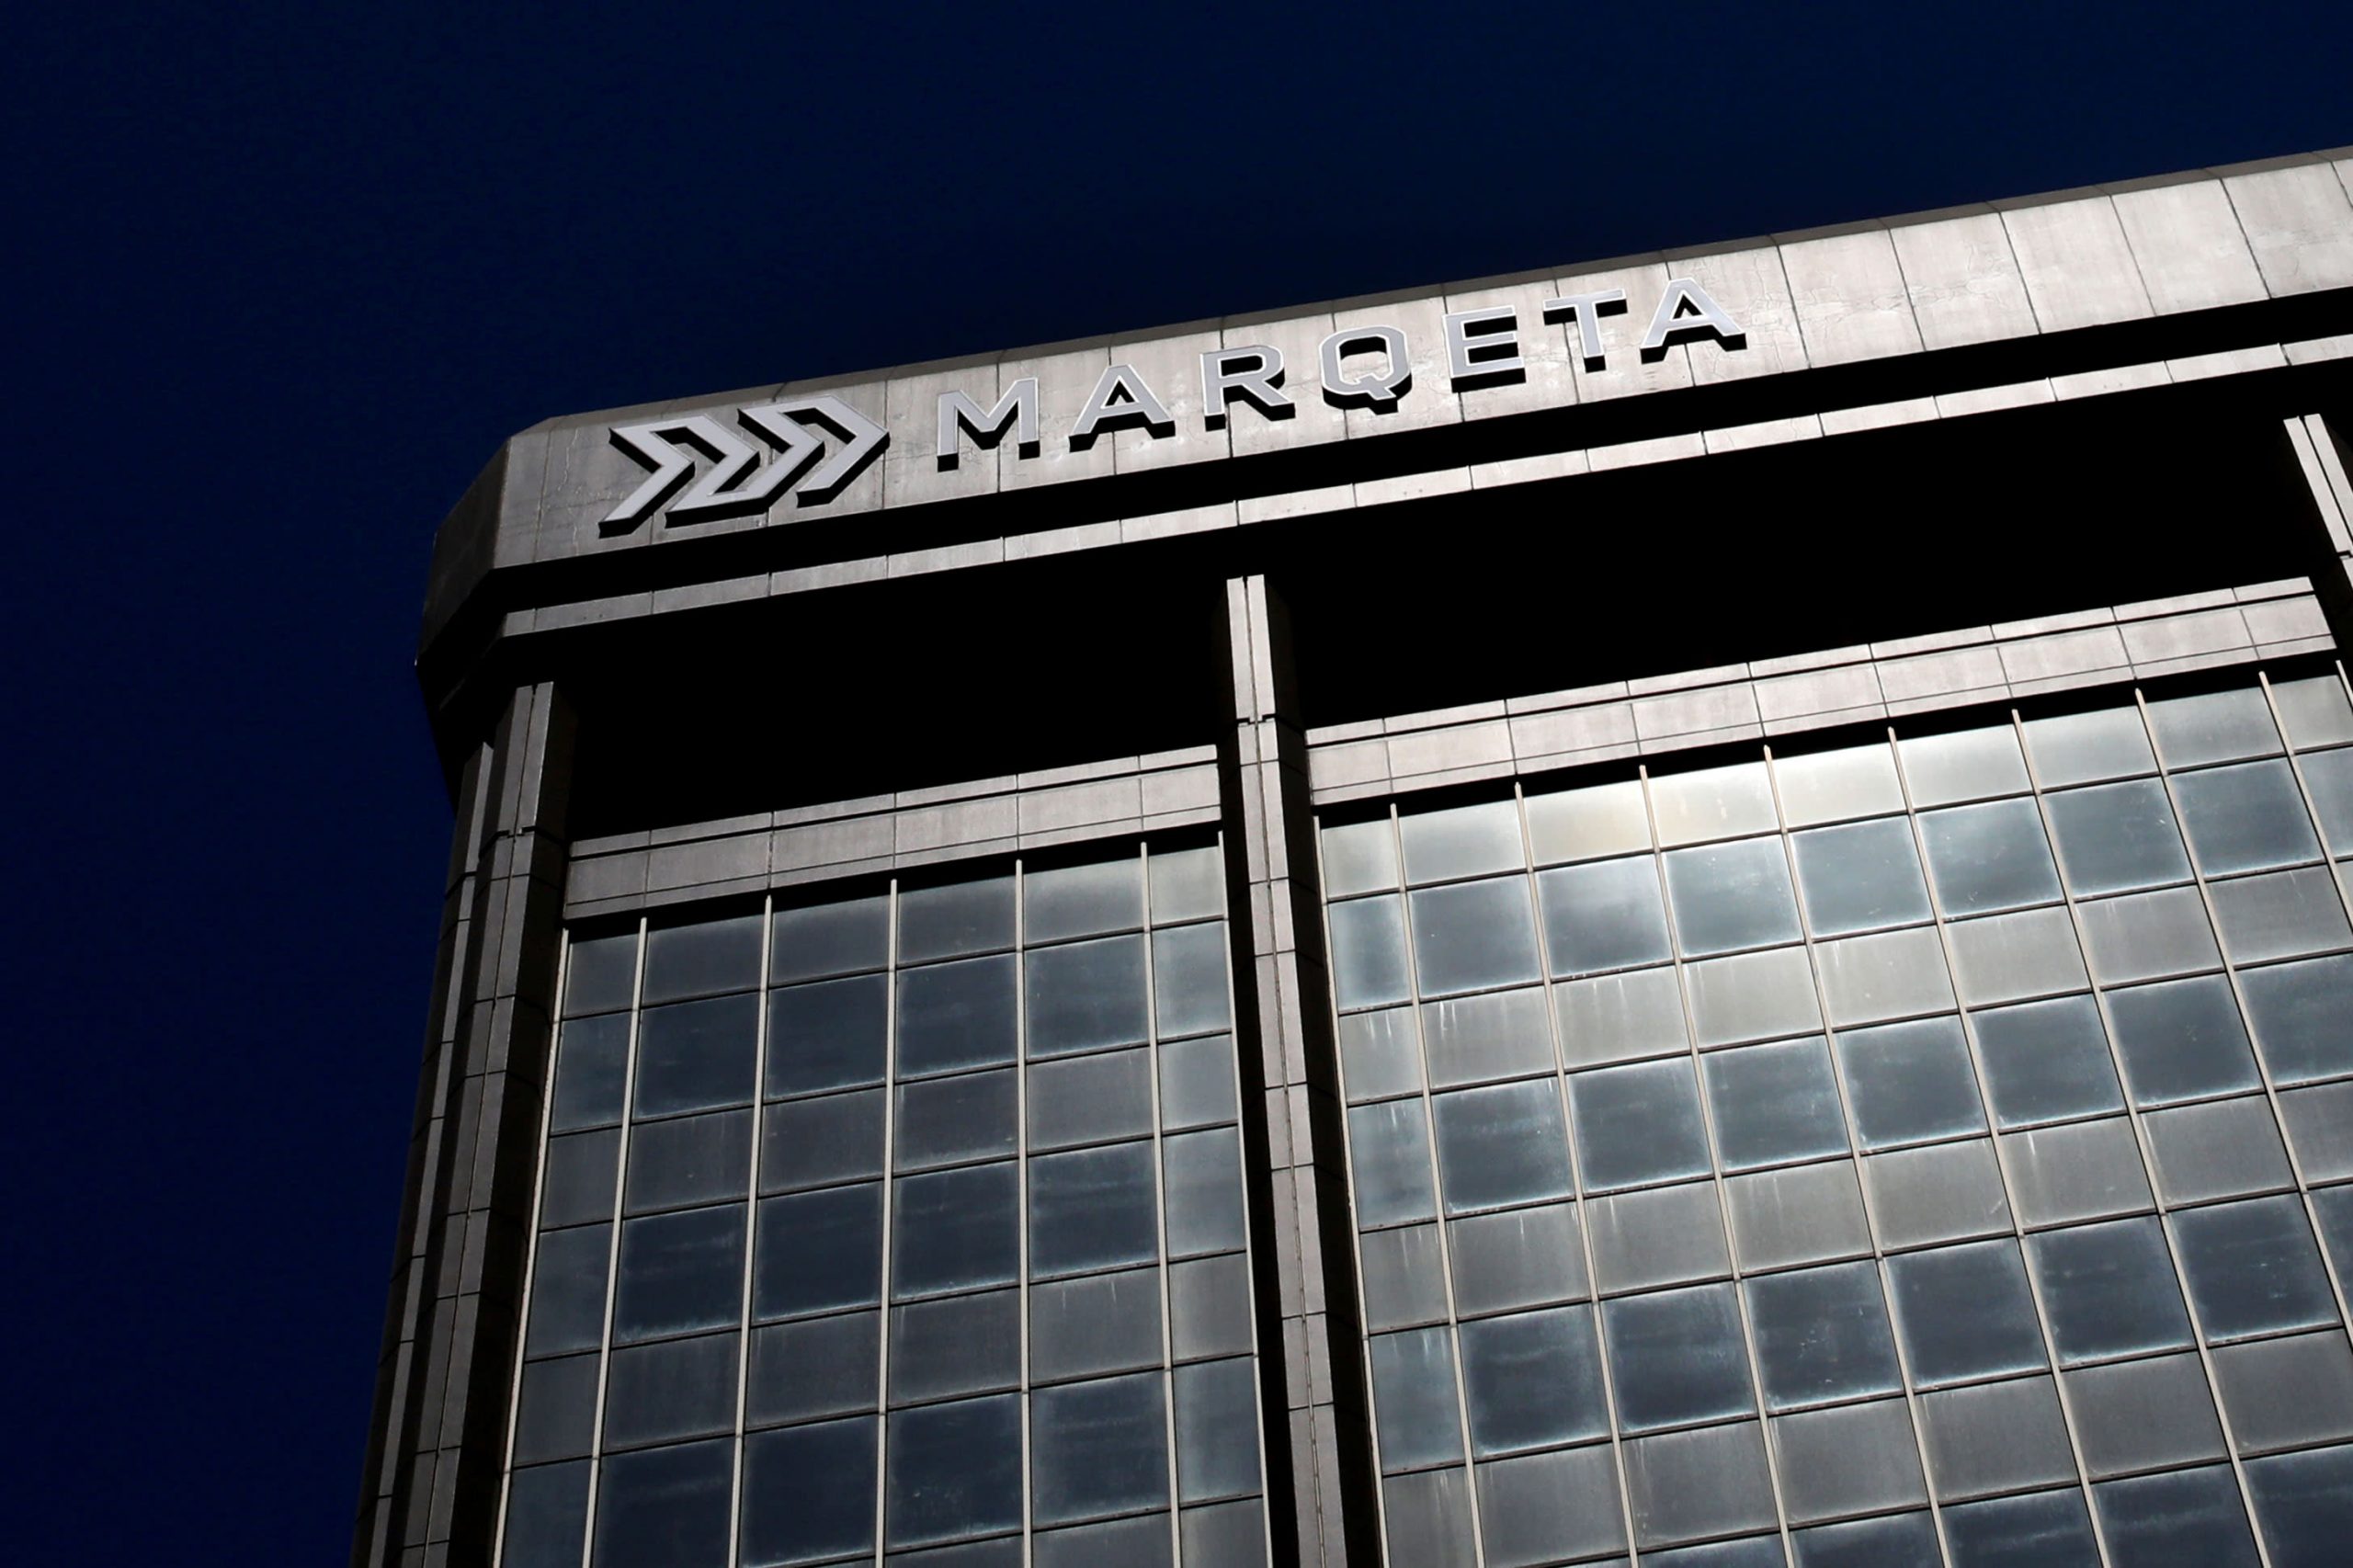 Payment tech company Marqeta files for IPO as value tops $16 billion on private markets